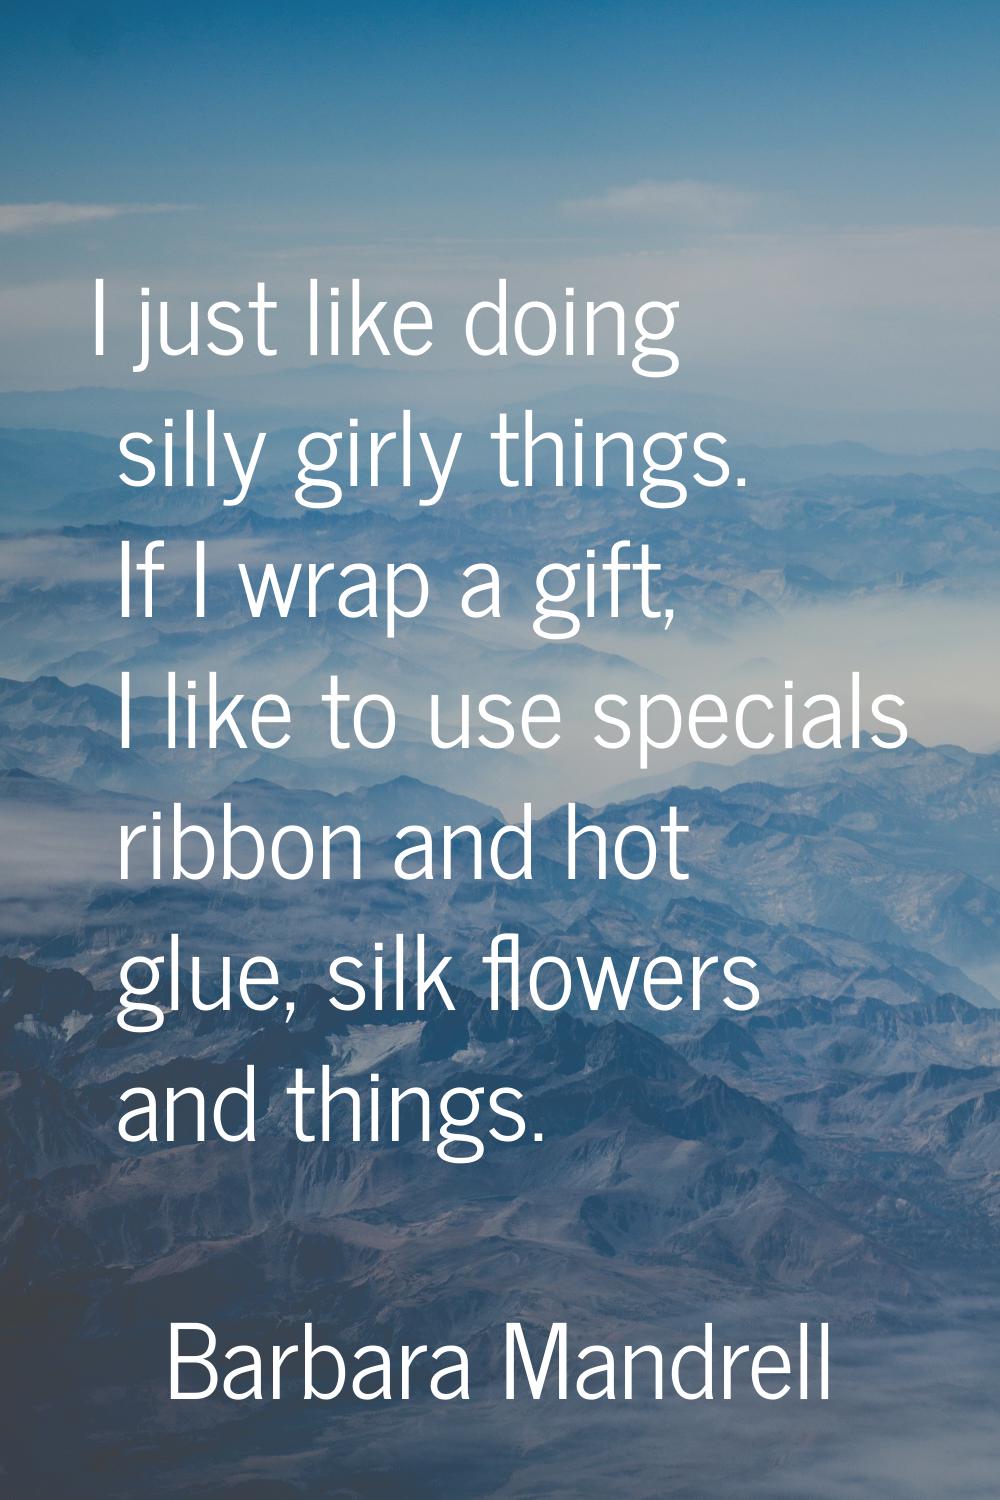 I just like doing silly girly things. If I wrap a gift, I like to use specials ribbon and hot glue,